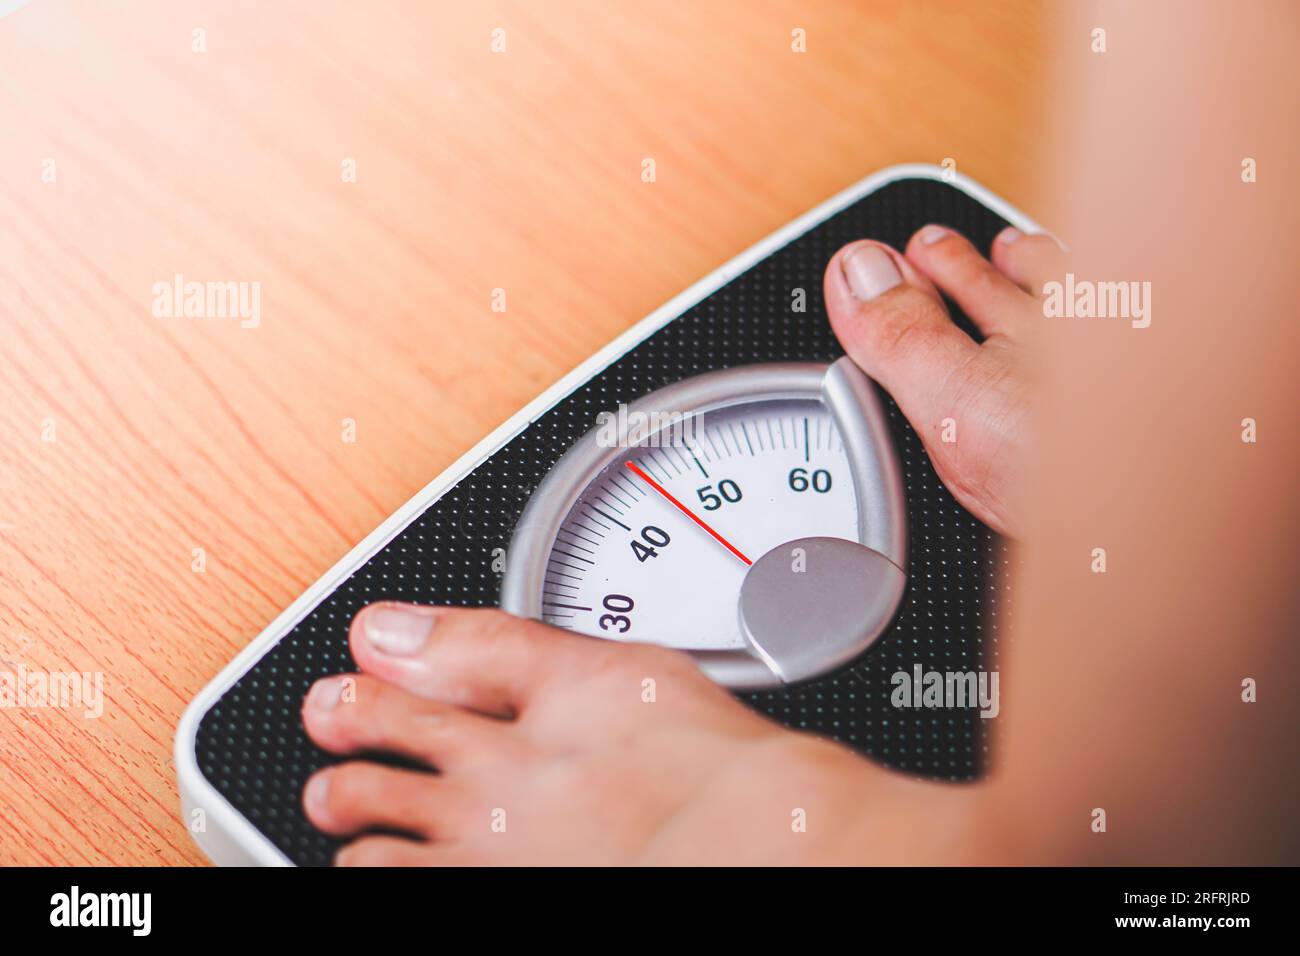 https://c8.alamy.com/comp/2RFRJRD/feet-standing-on-a-black-scale-weighing-machine-with-a-wooden-base-2RFRJRD.jpg